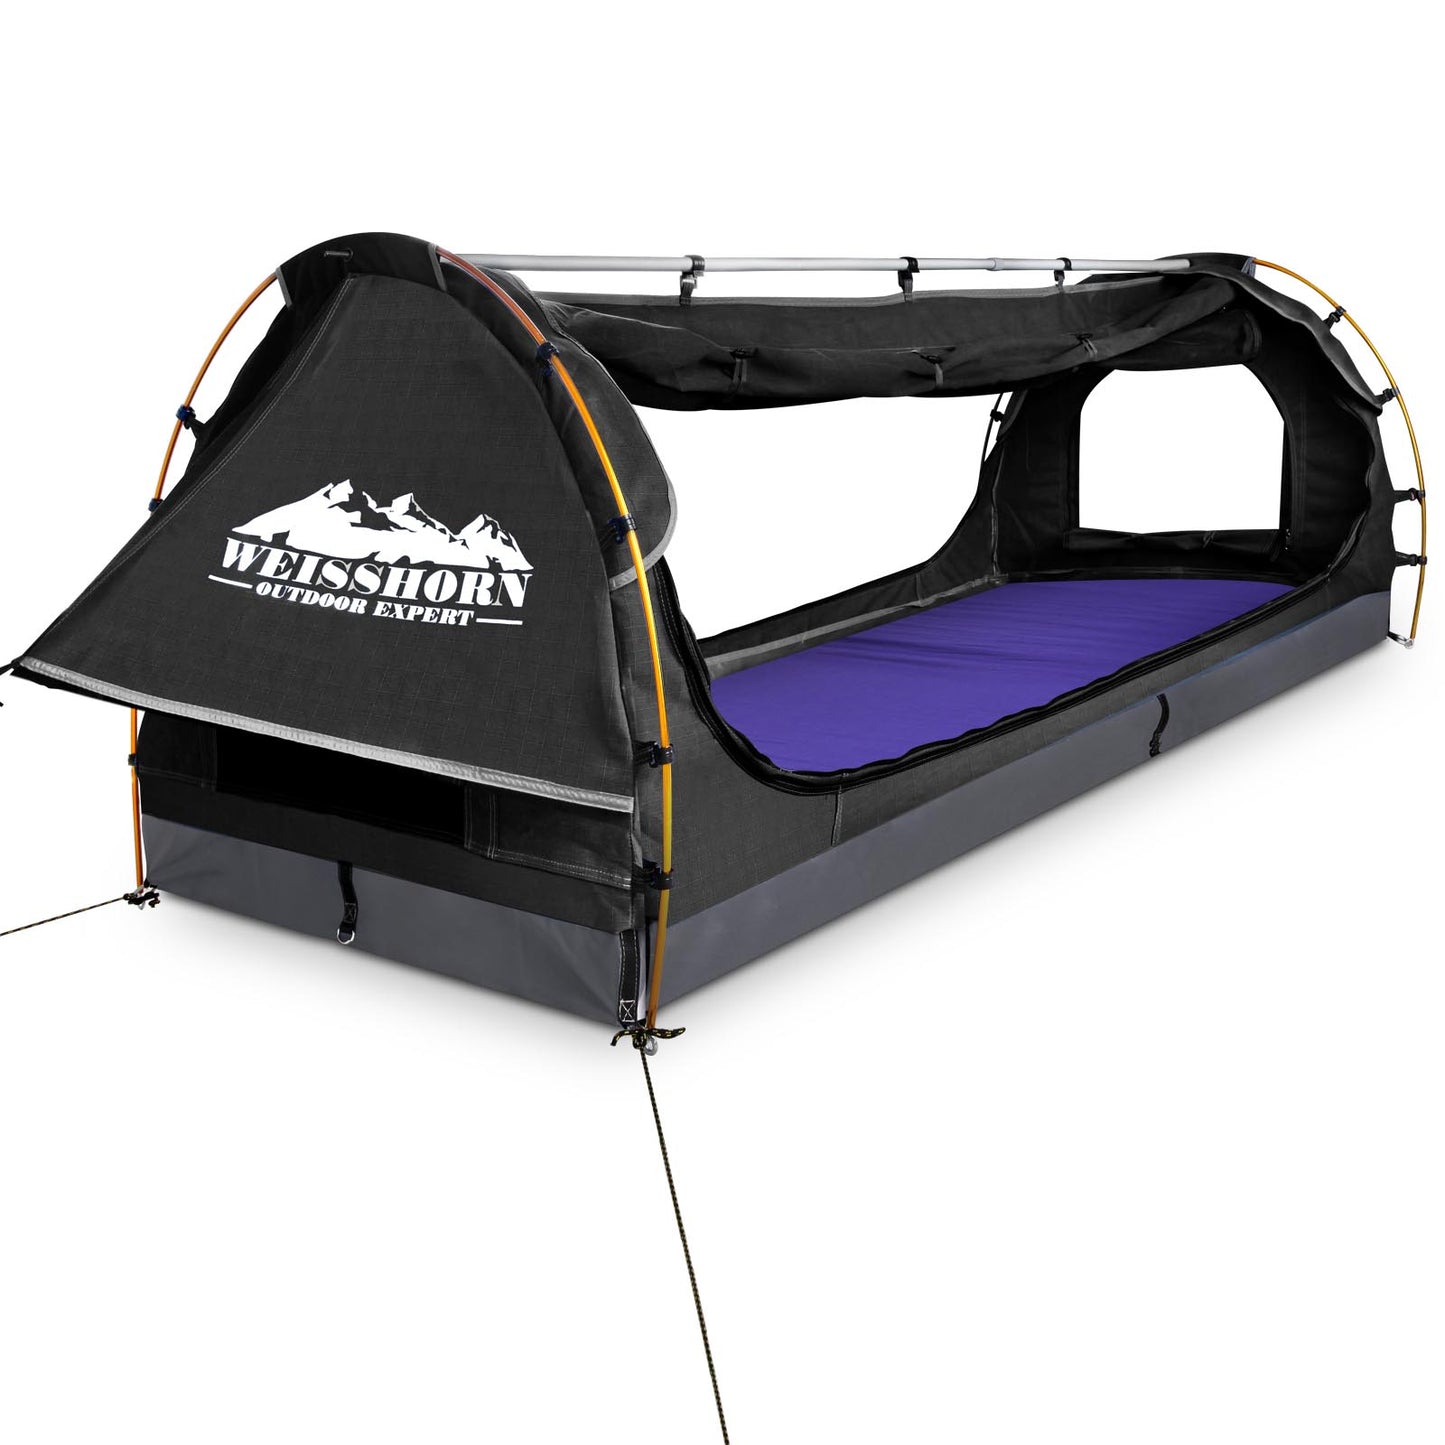 Weisshorn King Single Swag Camping Swag Canvas Tent - Dark Grey